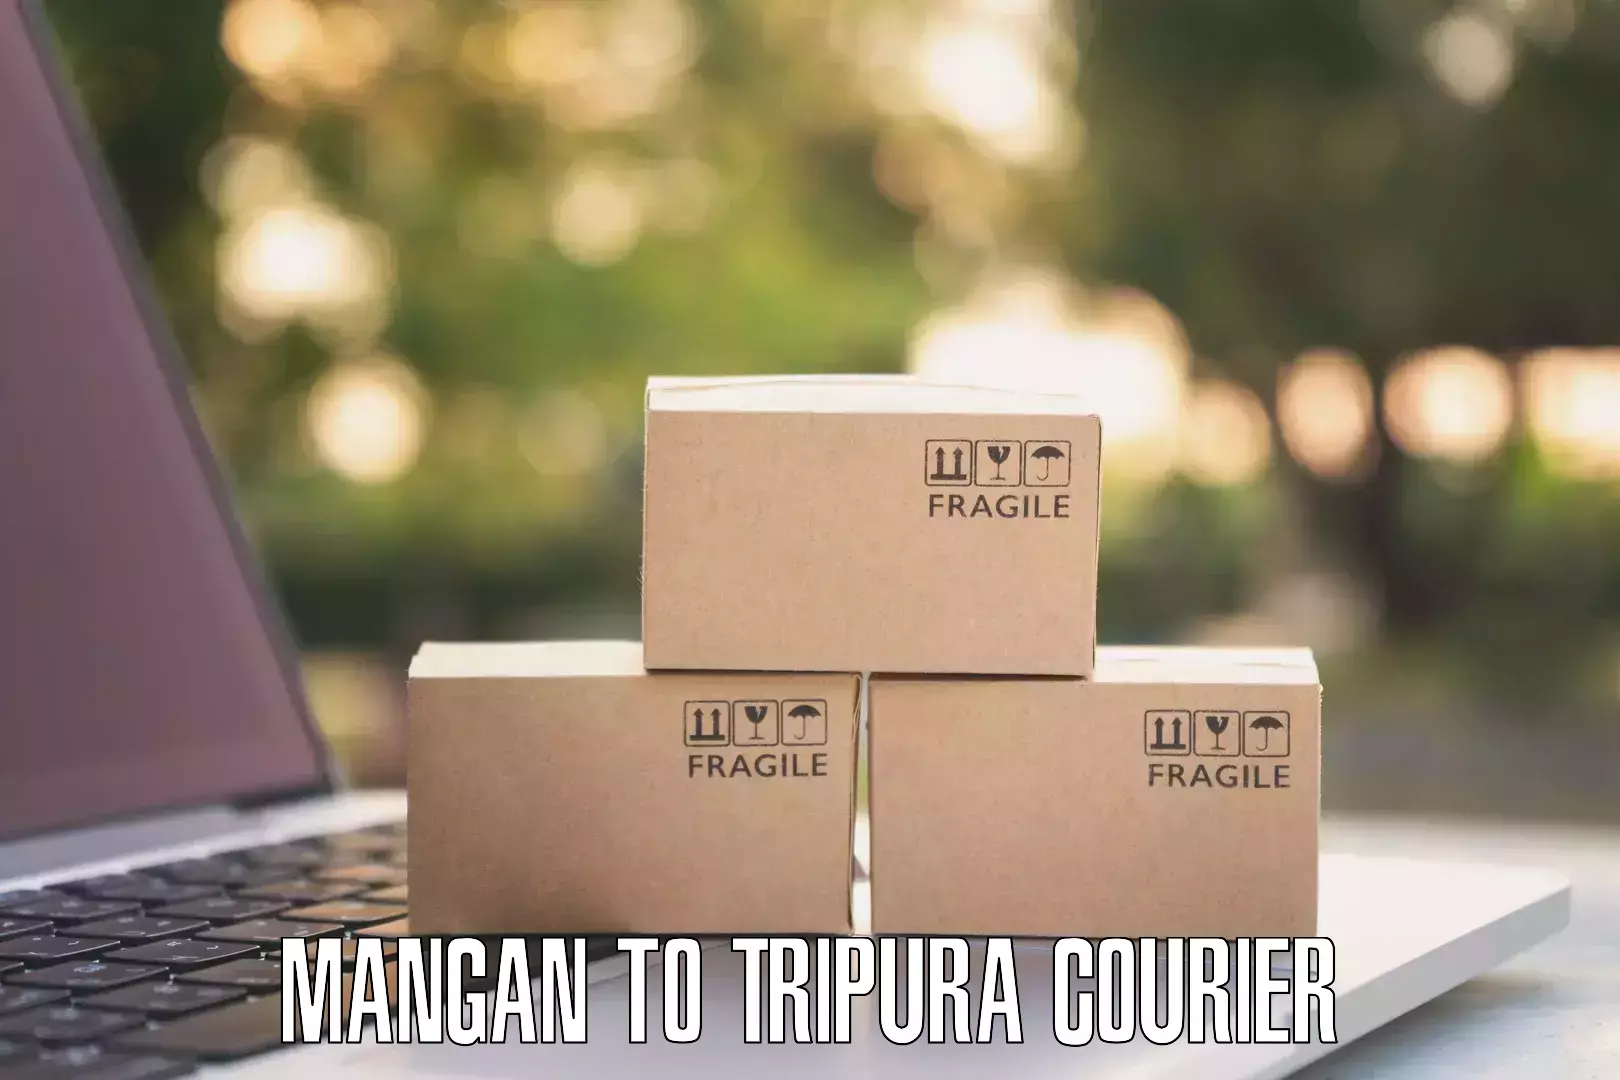 Automated parcel services Mangan to North Tripura